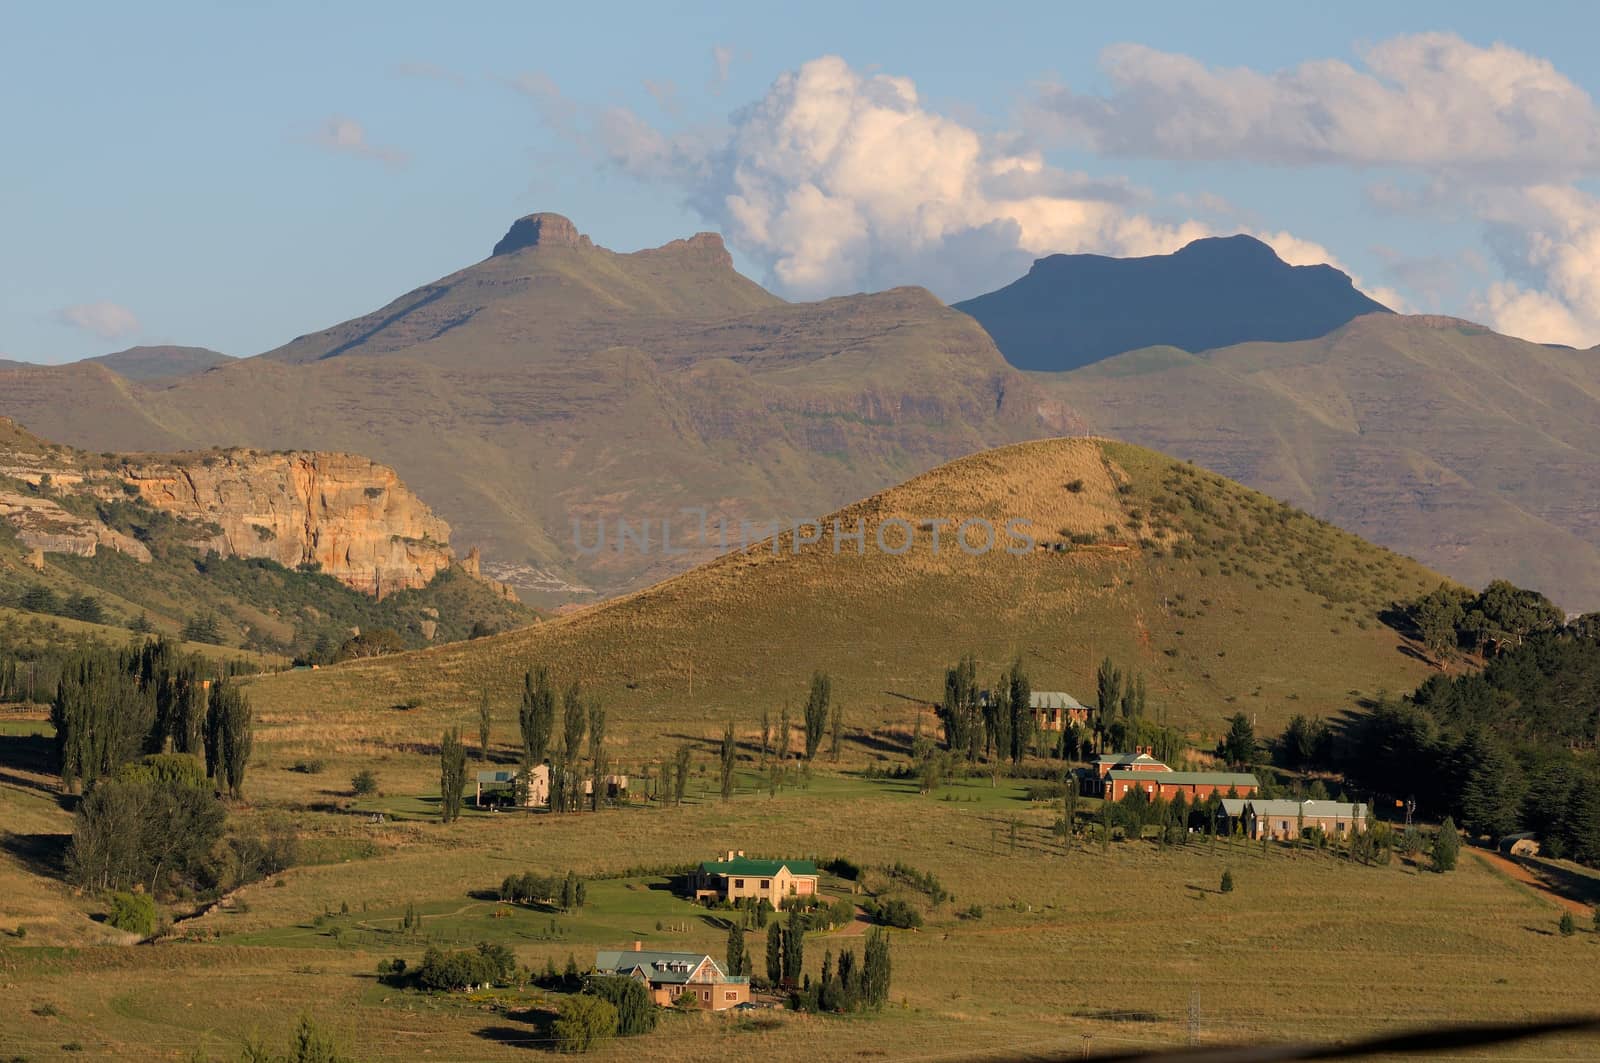 Late afternoon landscape near Clarens, South Africa